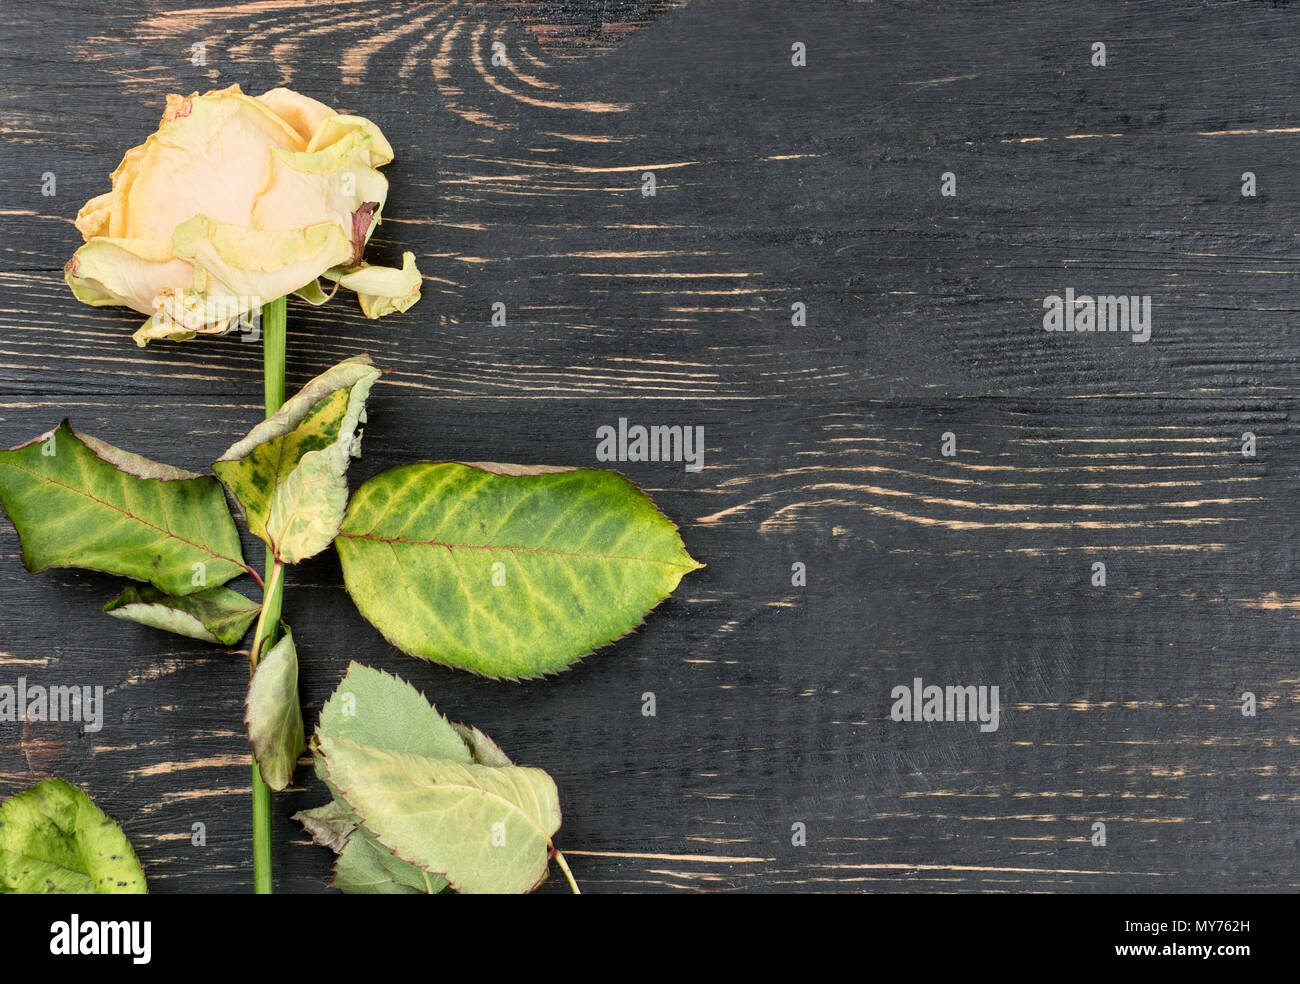 Sluggish yellow rose on wooden background, top view Stock Photo